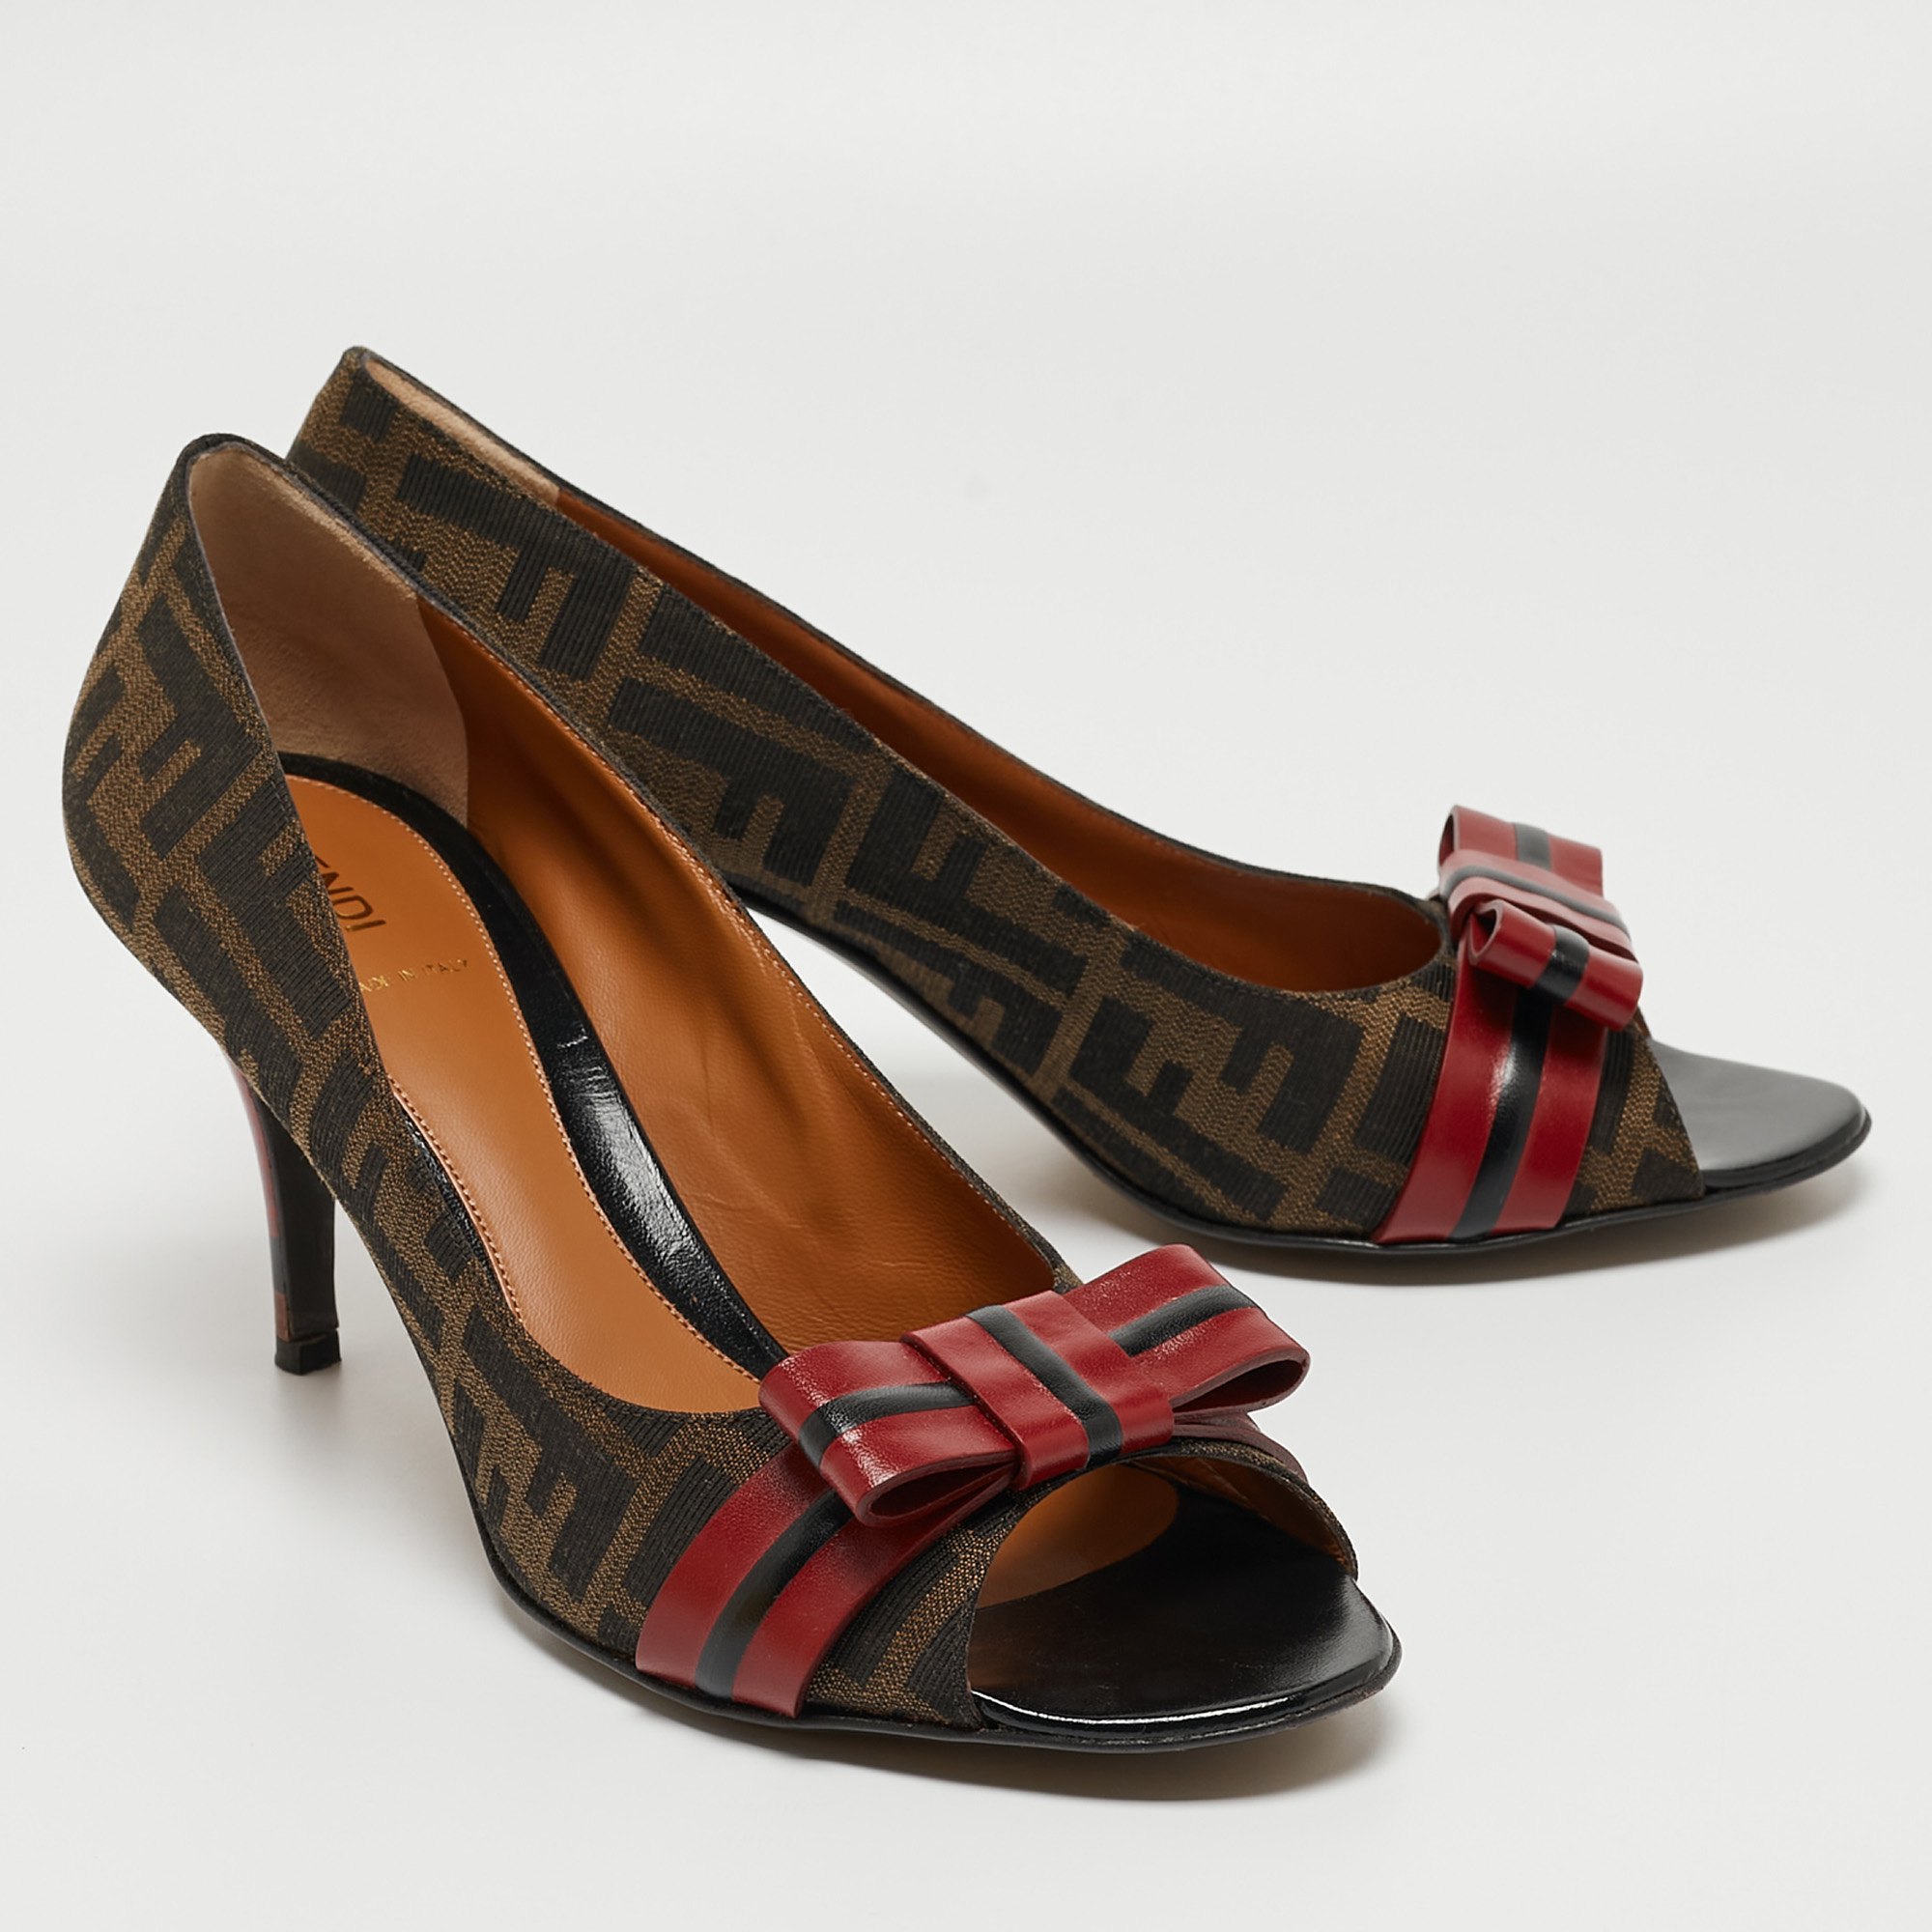 Fendi Brown/Burgundy Tobacco Zucca Canvas And Leather Bow Pumps Size 41